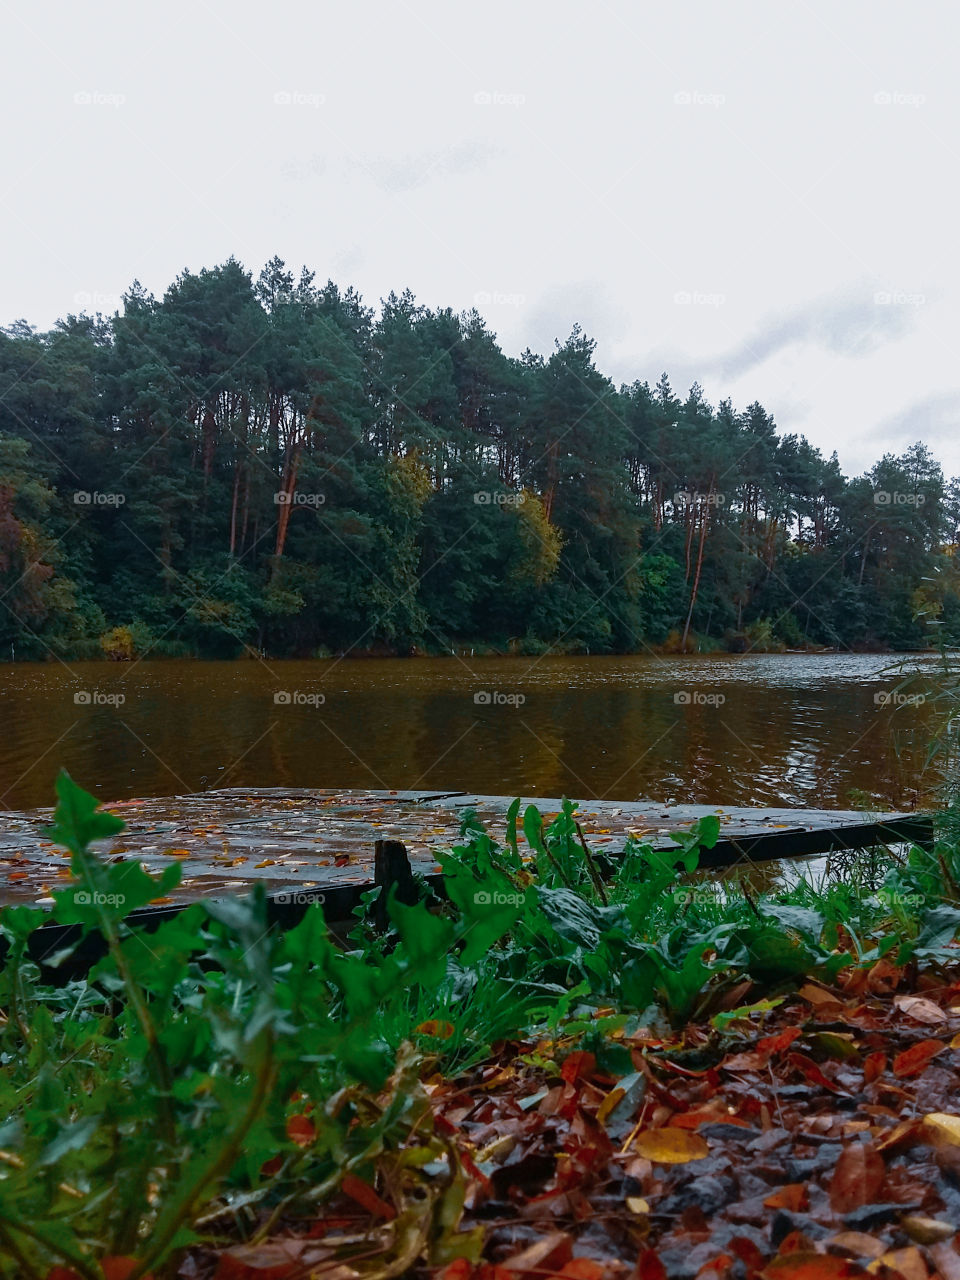 autumn nature after the rain: the platform, the lake, the forest in the background